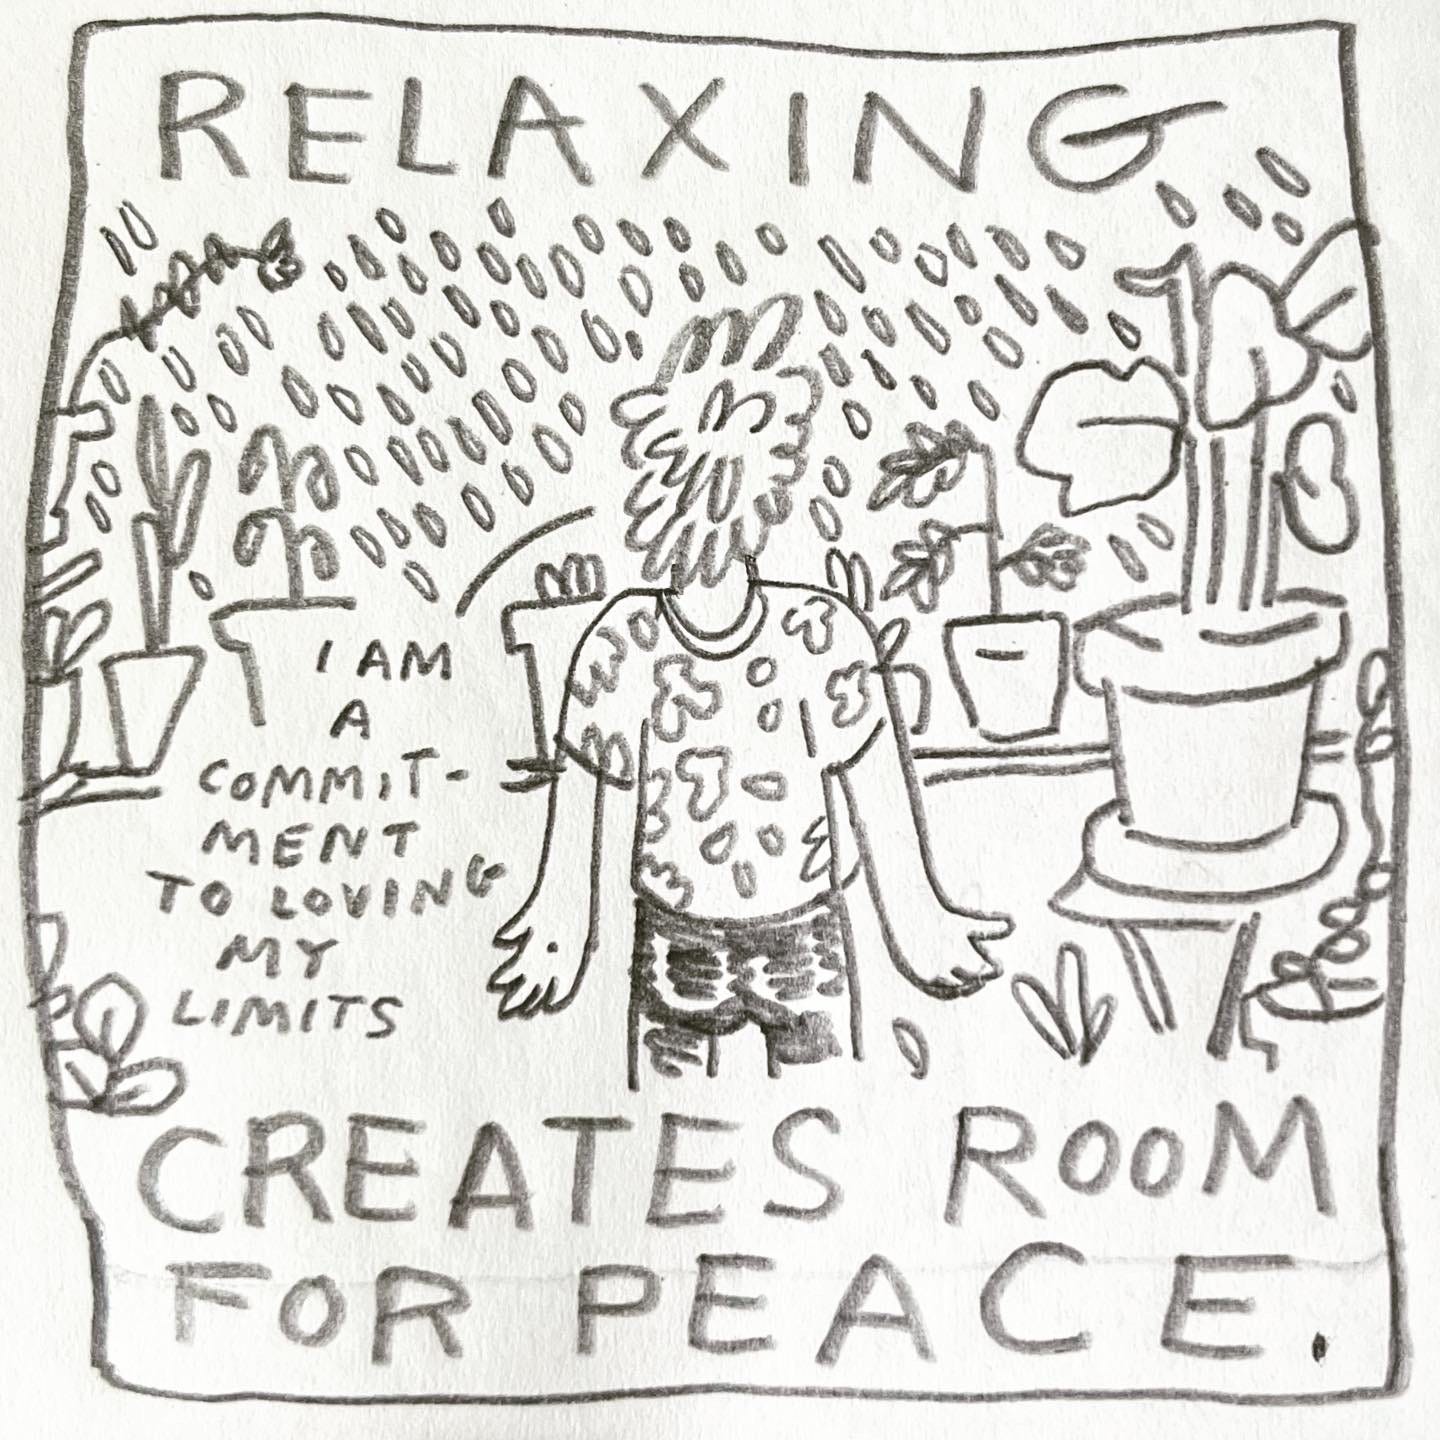 Panel 5: relaxing creates room for peace Image: it is raining. Lark stands, facing away from us, on a balcony full of potted plants. Their arms are relaxed by their side with open palms. They say, "I am a commitment to loving my limits"